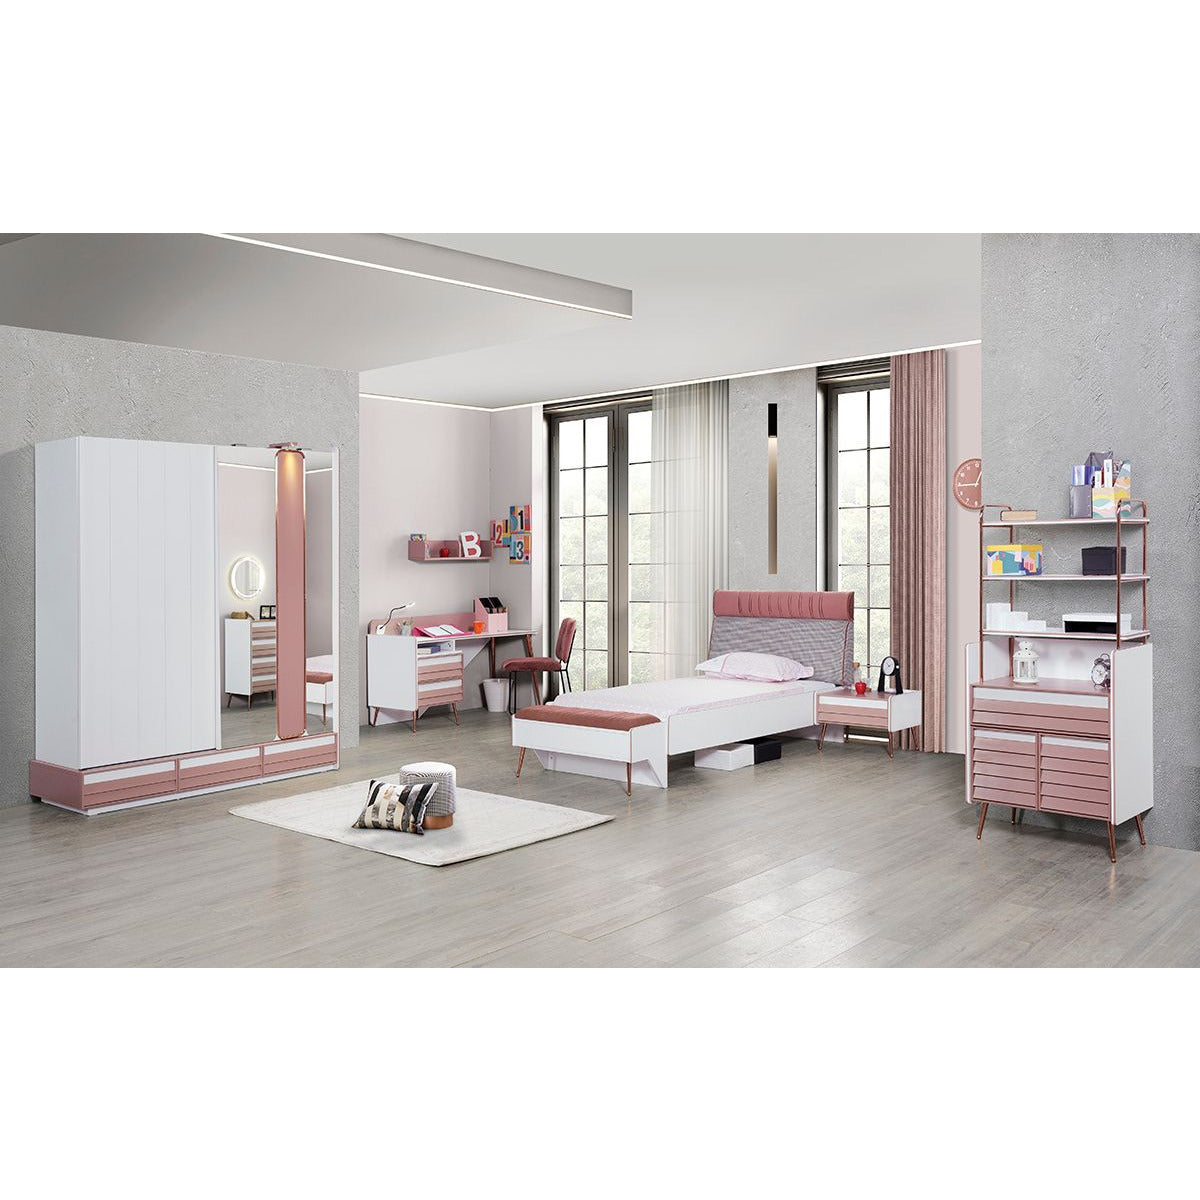 Rose Pall - LINE Furniture Group